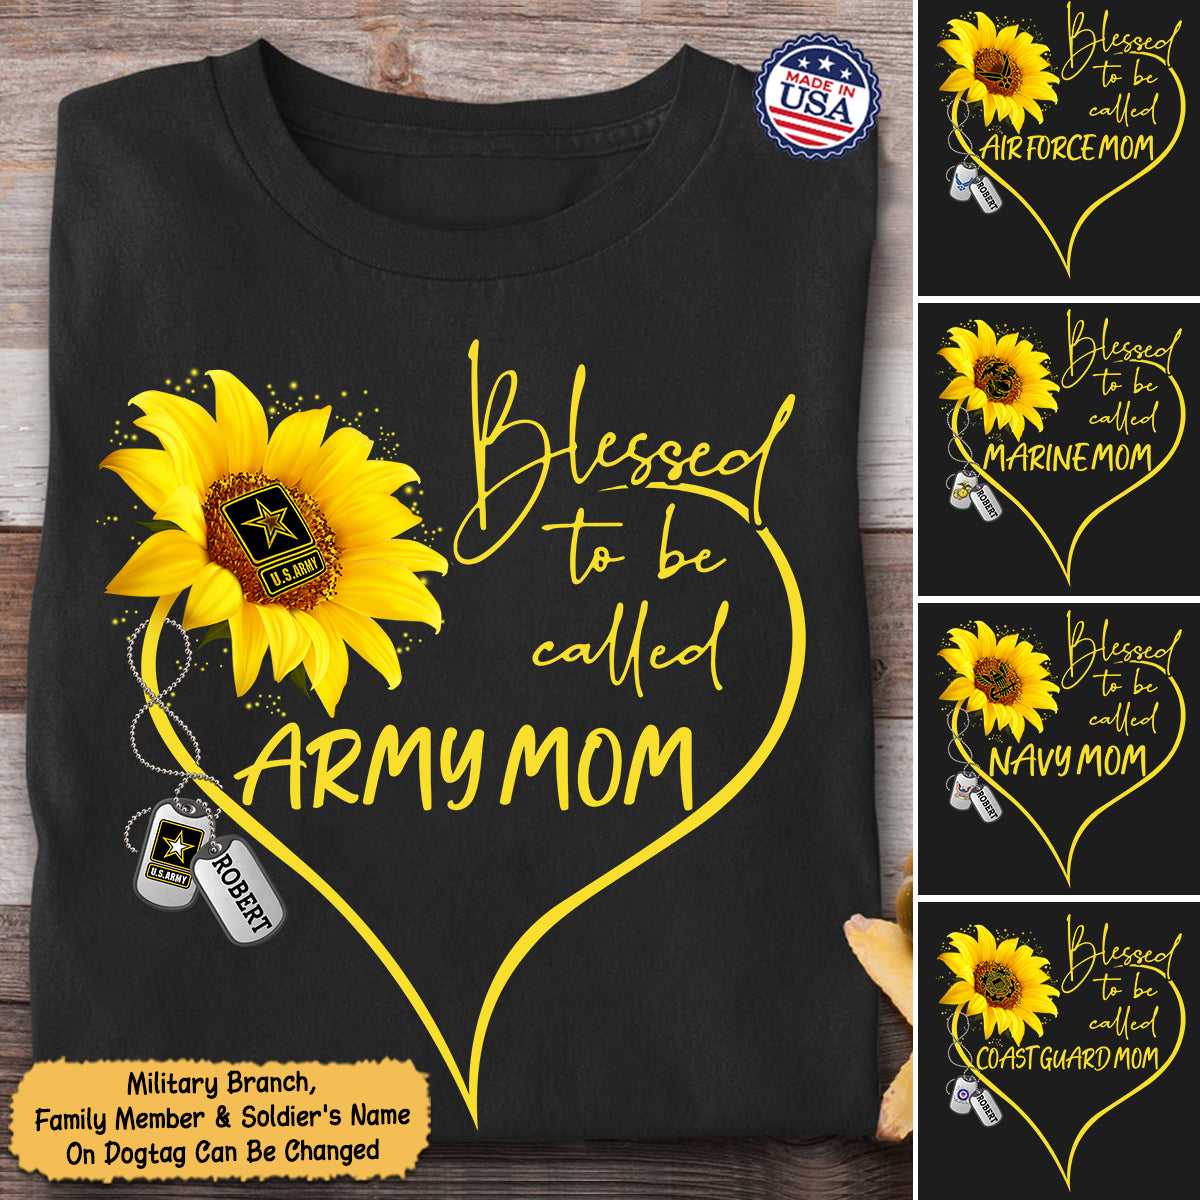 Personalized Soldier's Name, Military Branch & Family Member - Blessed to be Called Army Mom, Navy Wife, Marine Grandma Tshirt - K1702 - Trhn